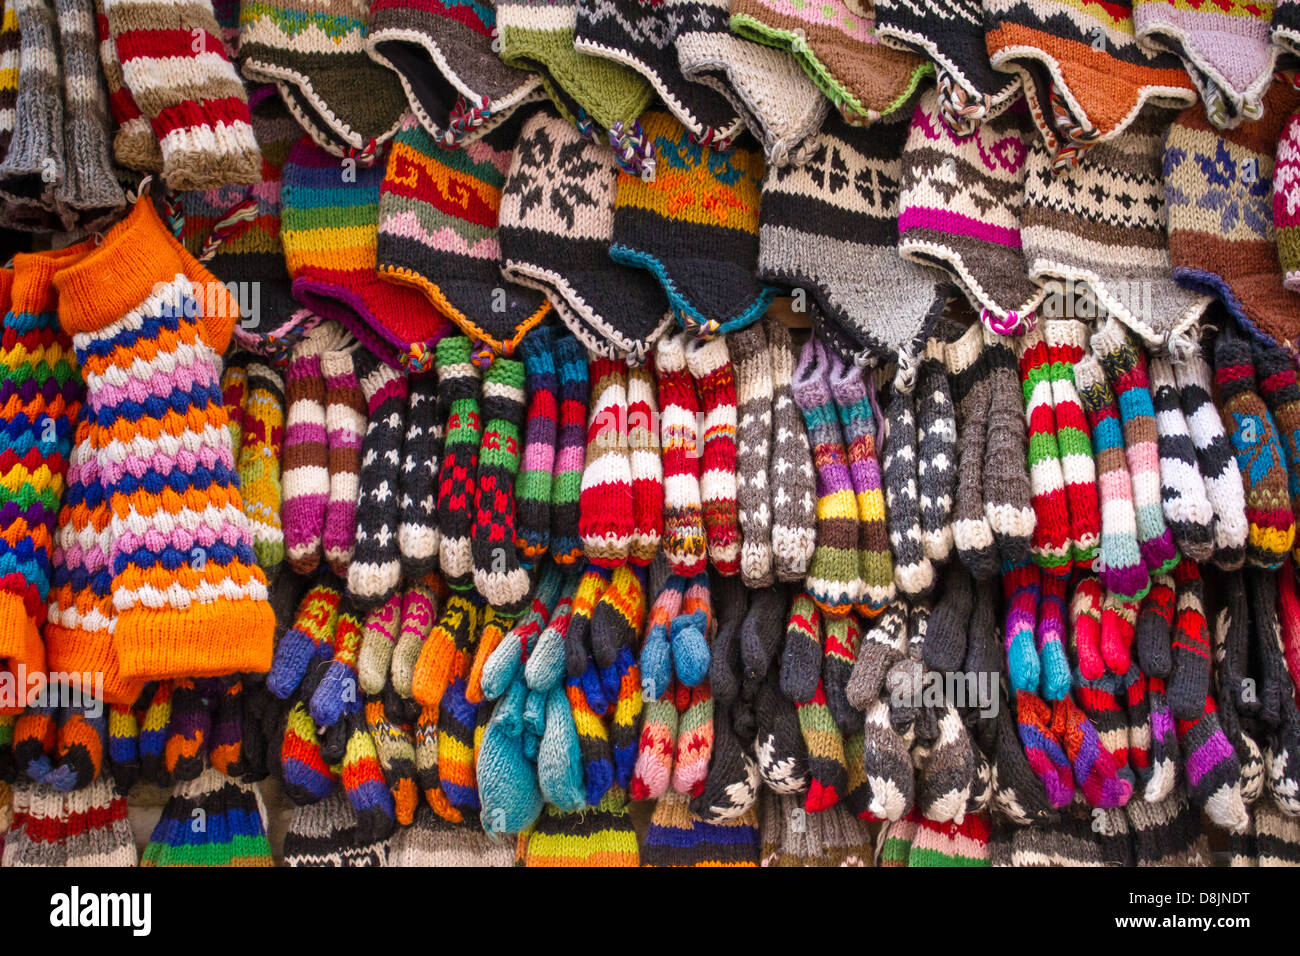 Colorful woolen socks, hats and gloves background Stock Photo